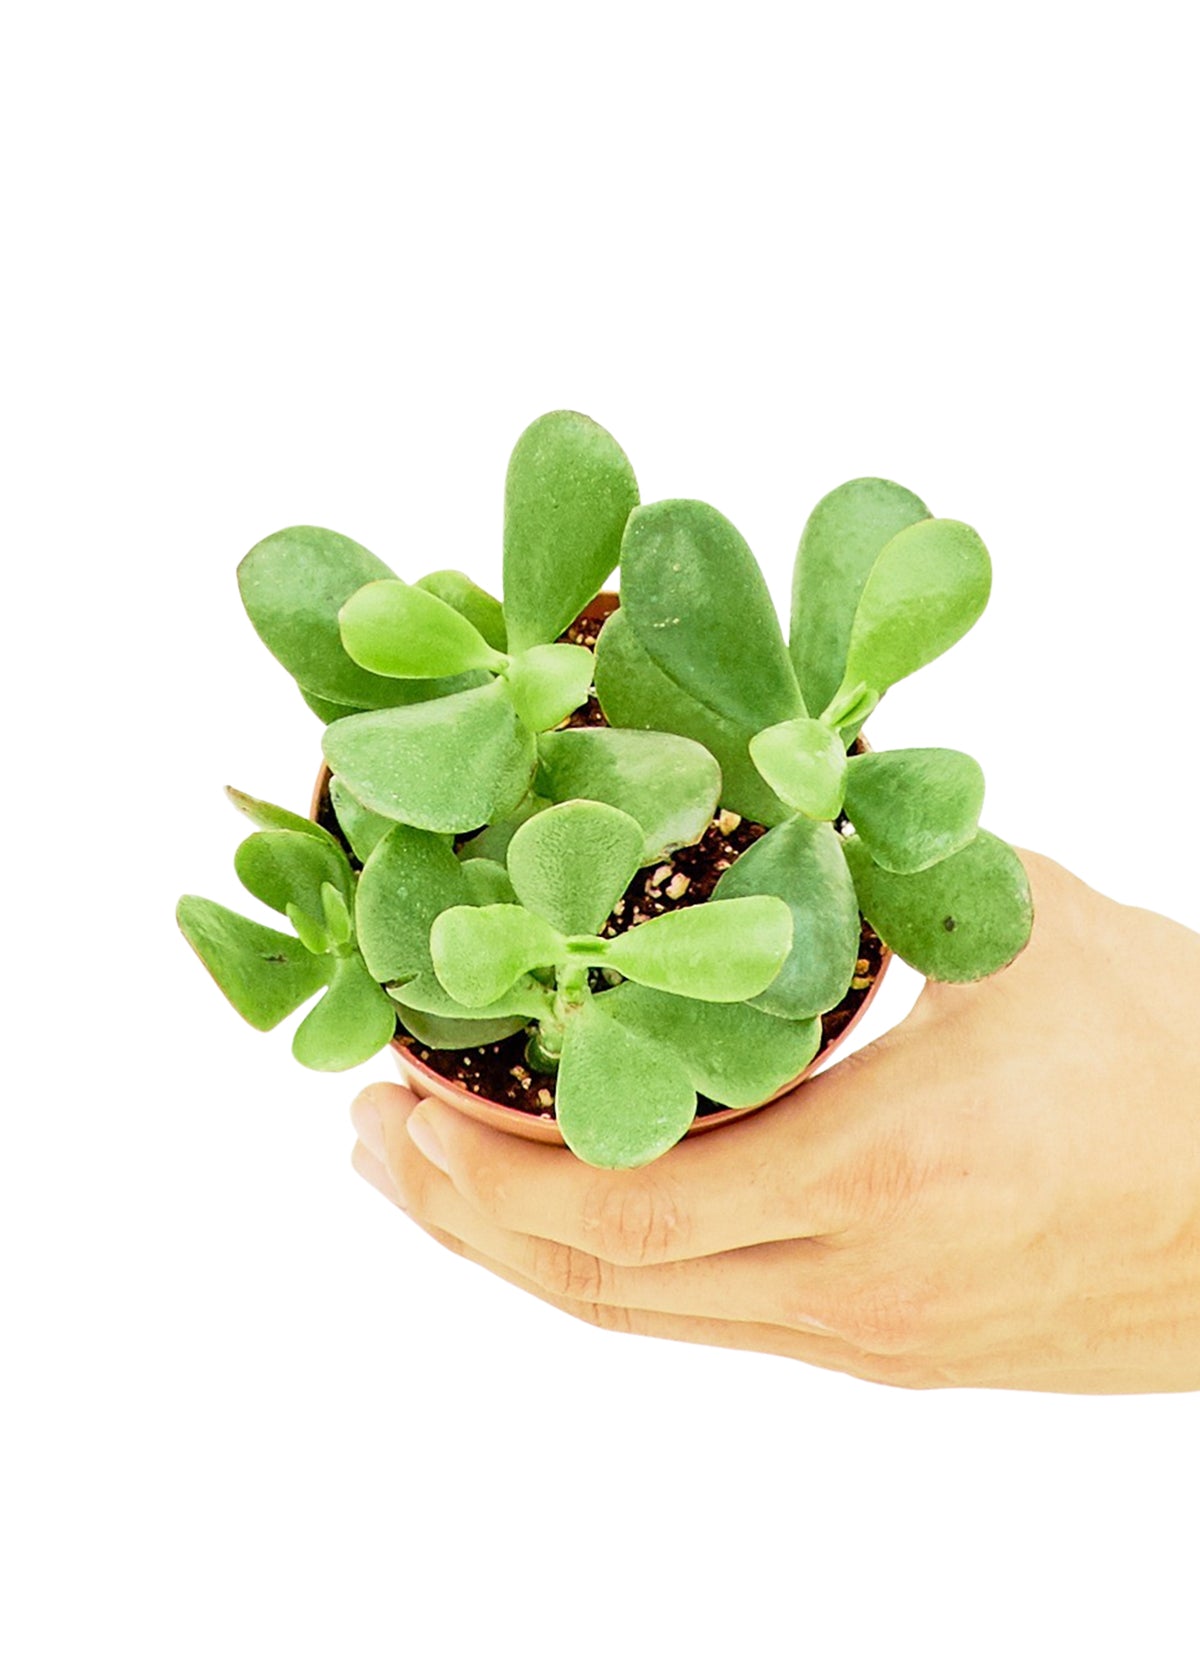 Small size Jade Plant in a growers pot with a white background with a hand holding the pot showing the top view